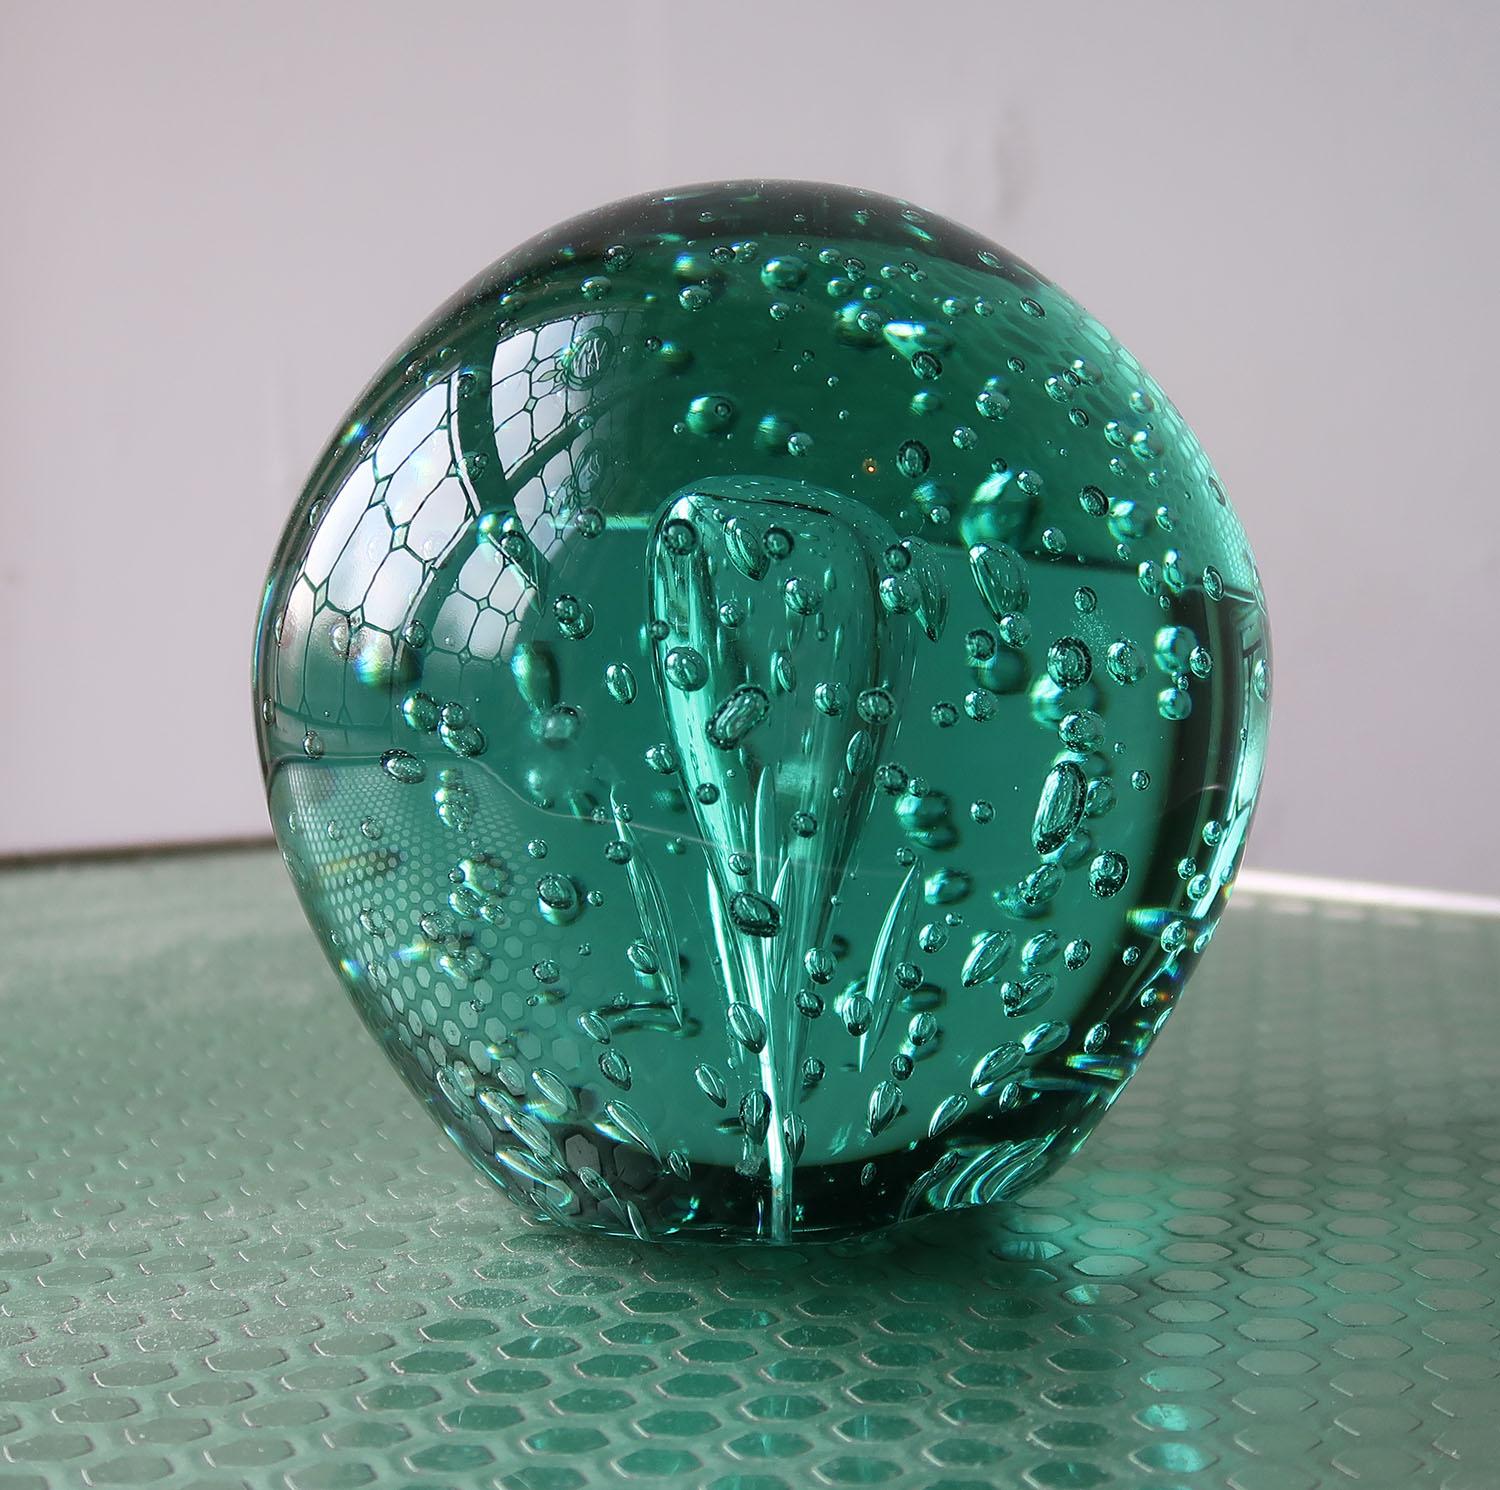 Wonderful piece of green glass with an amazing bubbly interior.

Most likely originally a doorstop or a paper weight

Good condition. 


